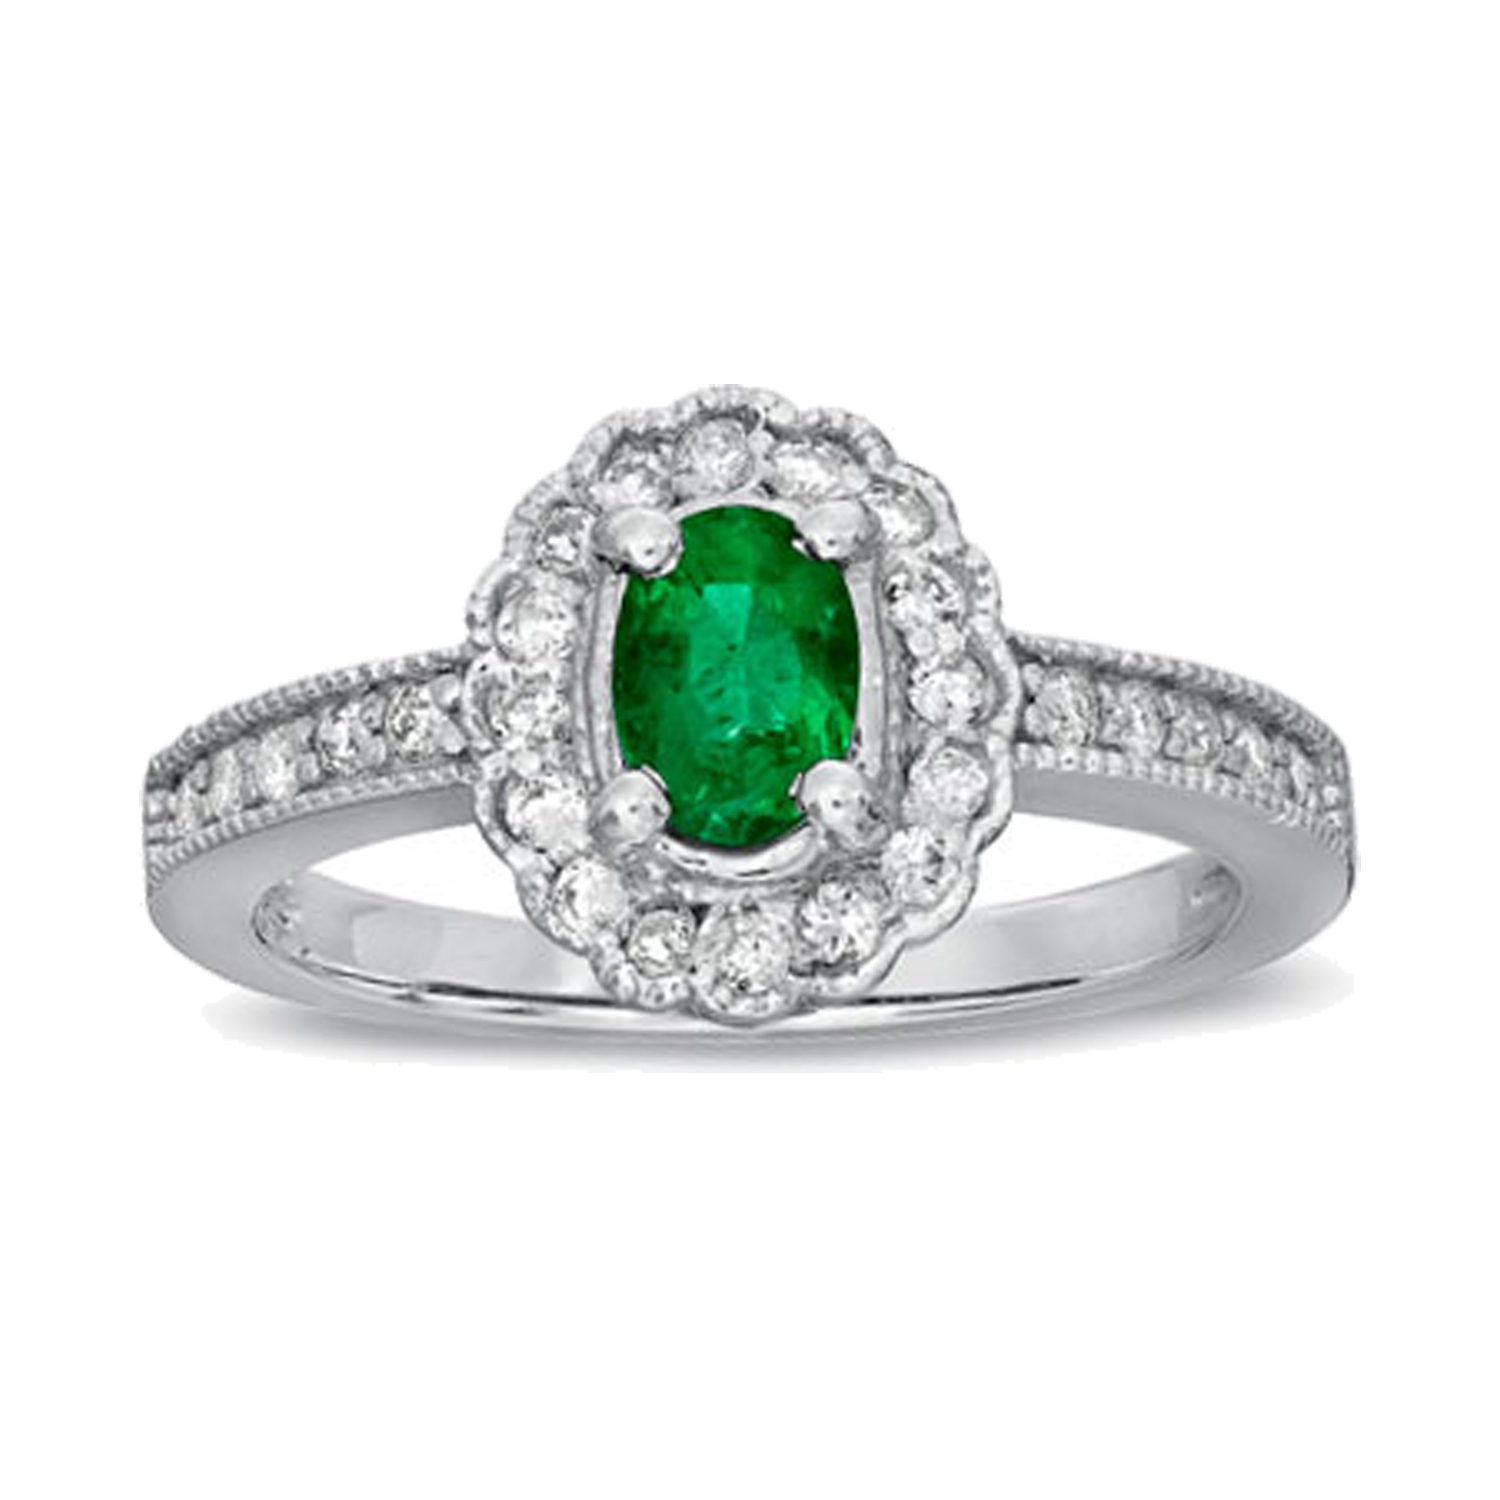 0.63ct tw Emerald and Diamond Fashion Ring set in 14k Gold